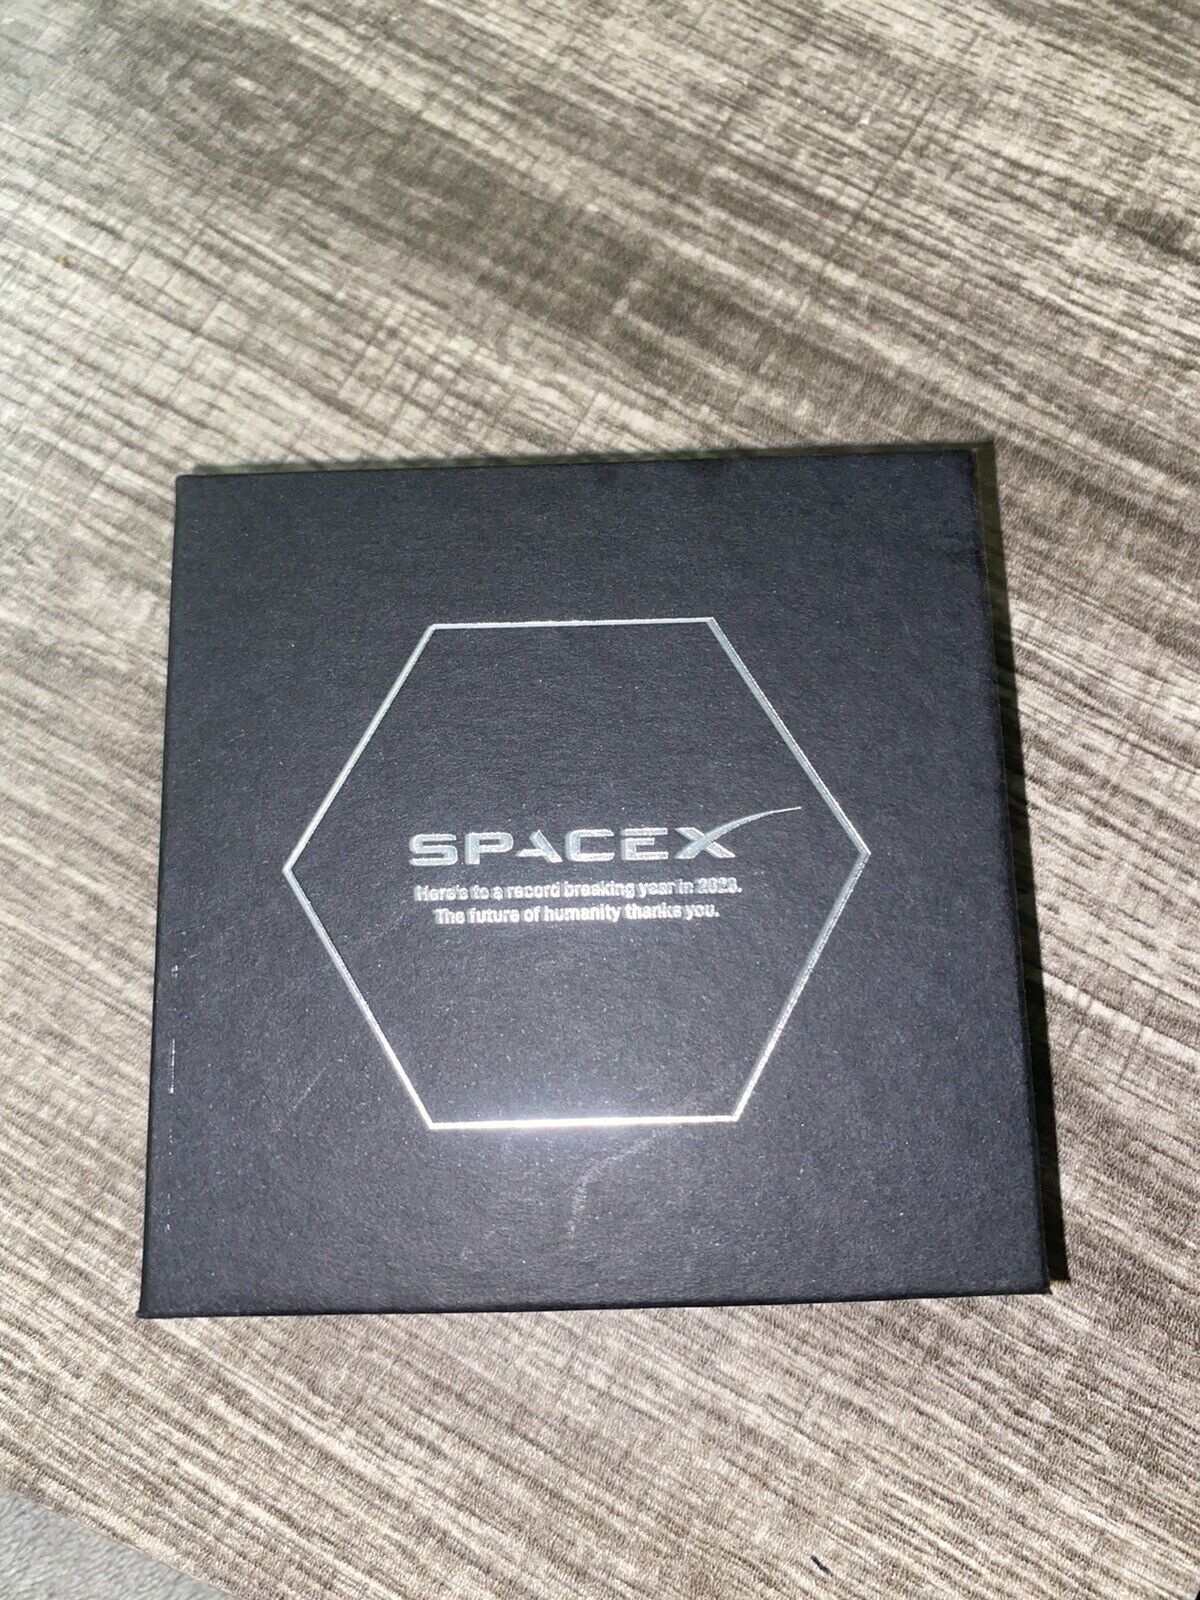 SpaceX Collectable Medallion for 2024 missions - New - Open Box (employee only)